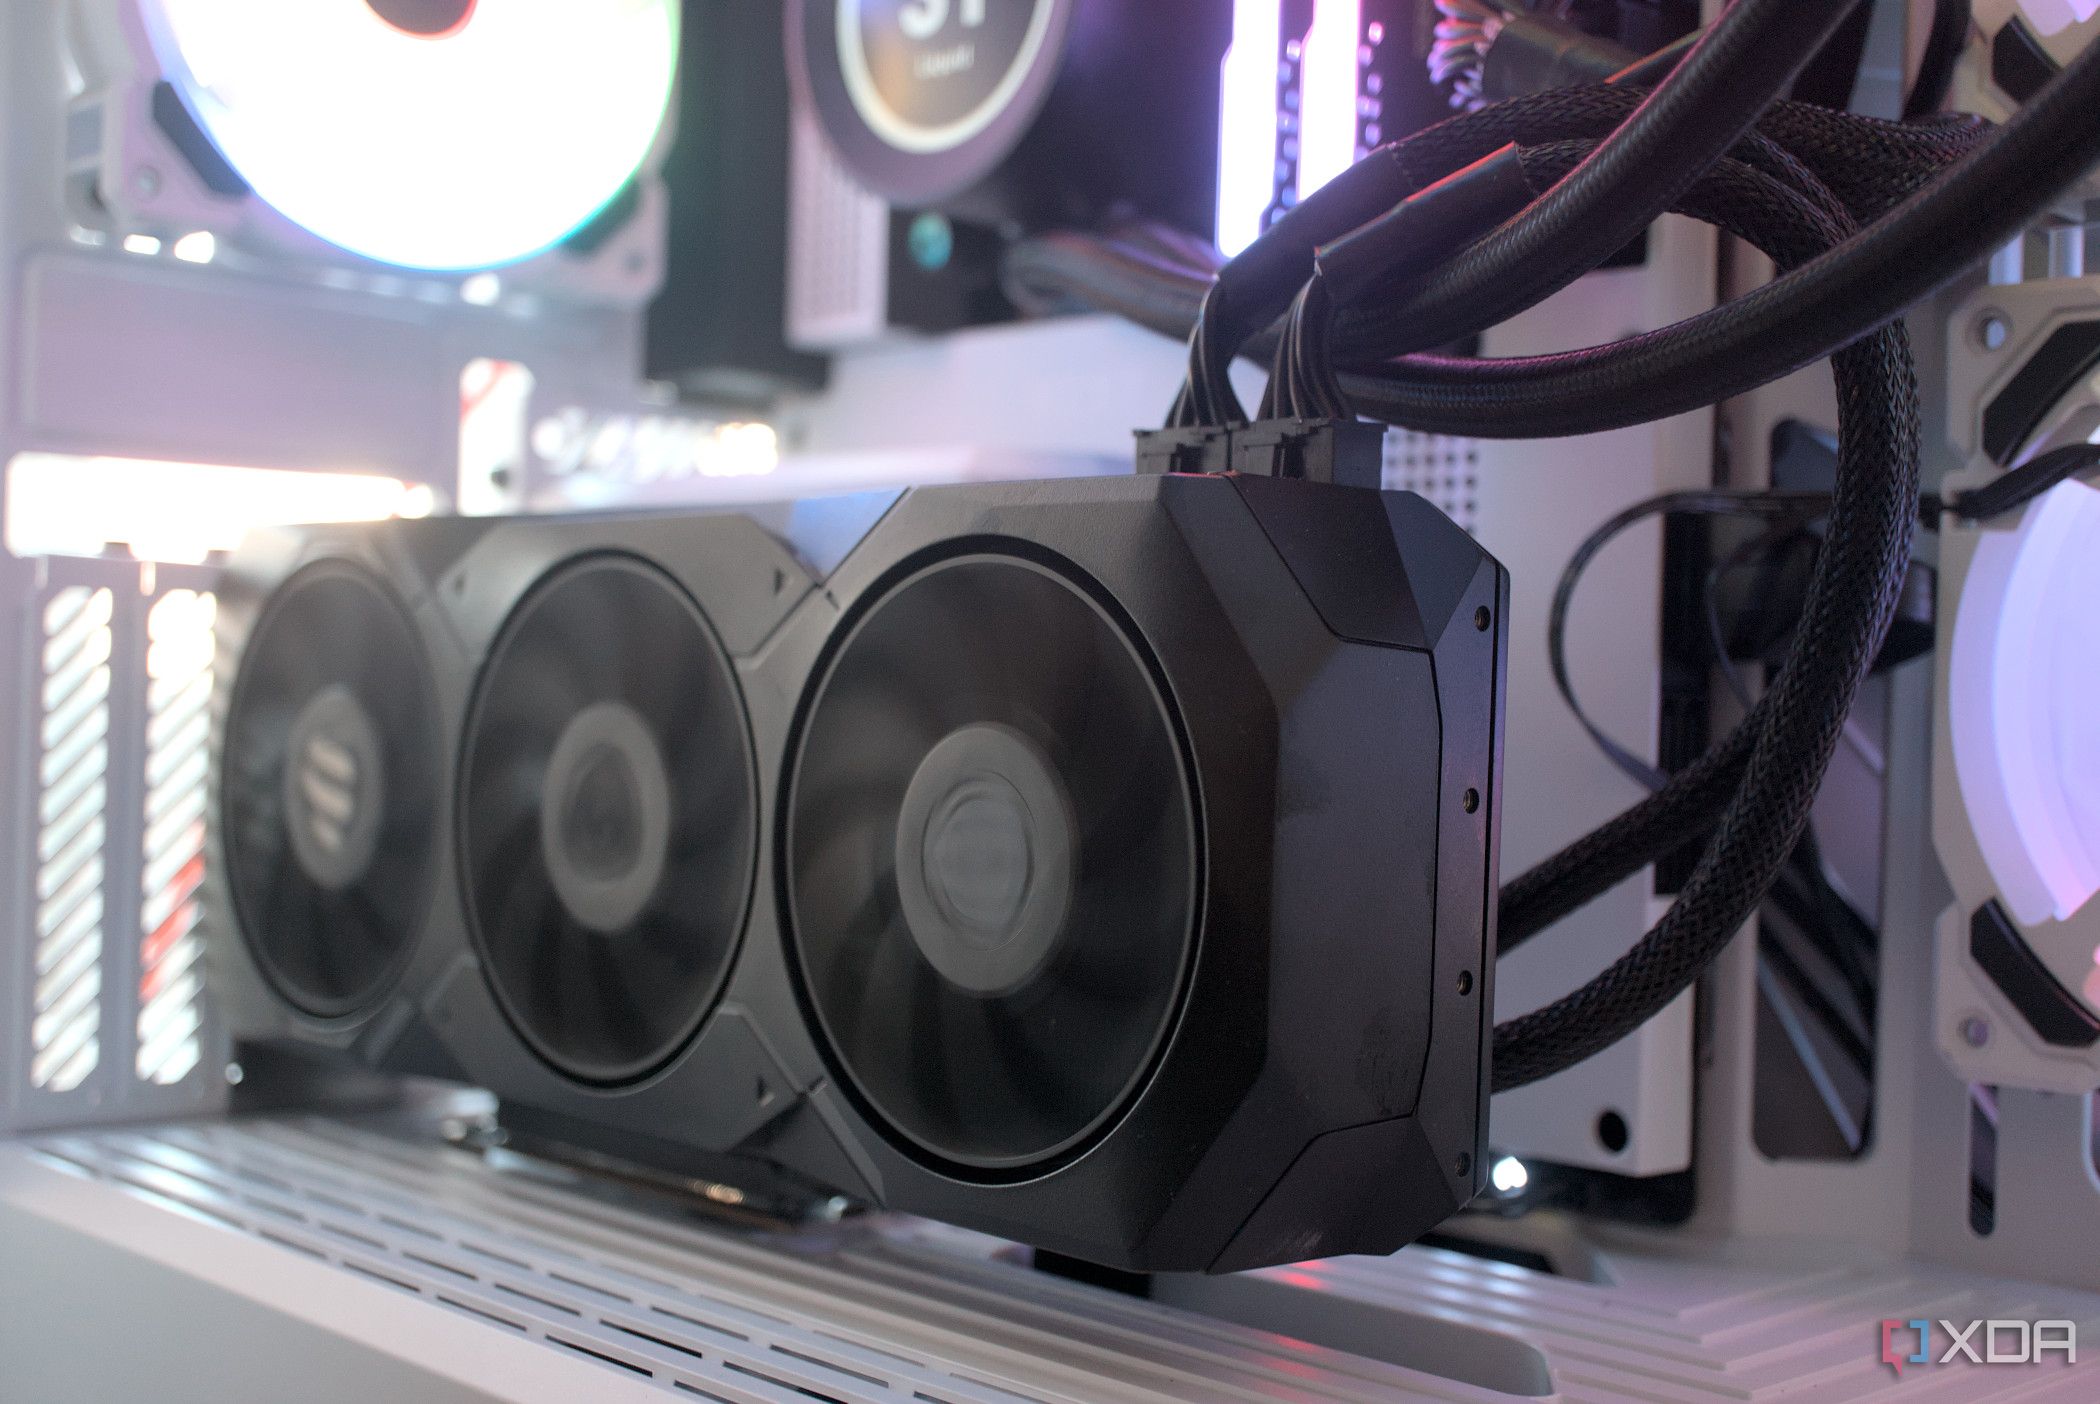 How to boost your GPU performance: 7 proven tips that work